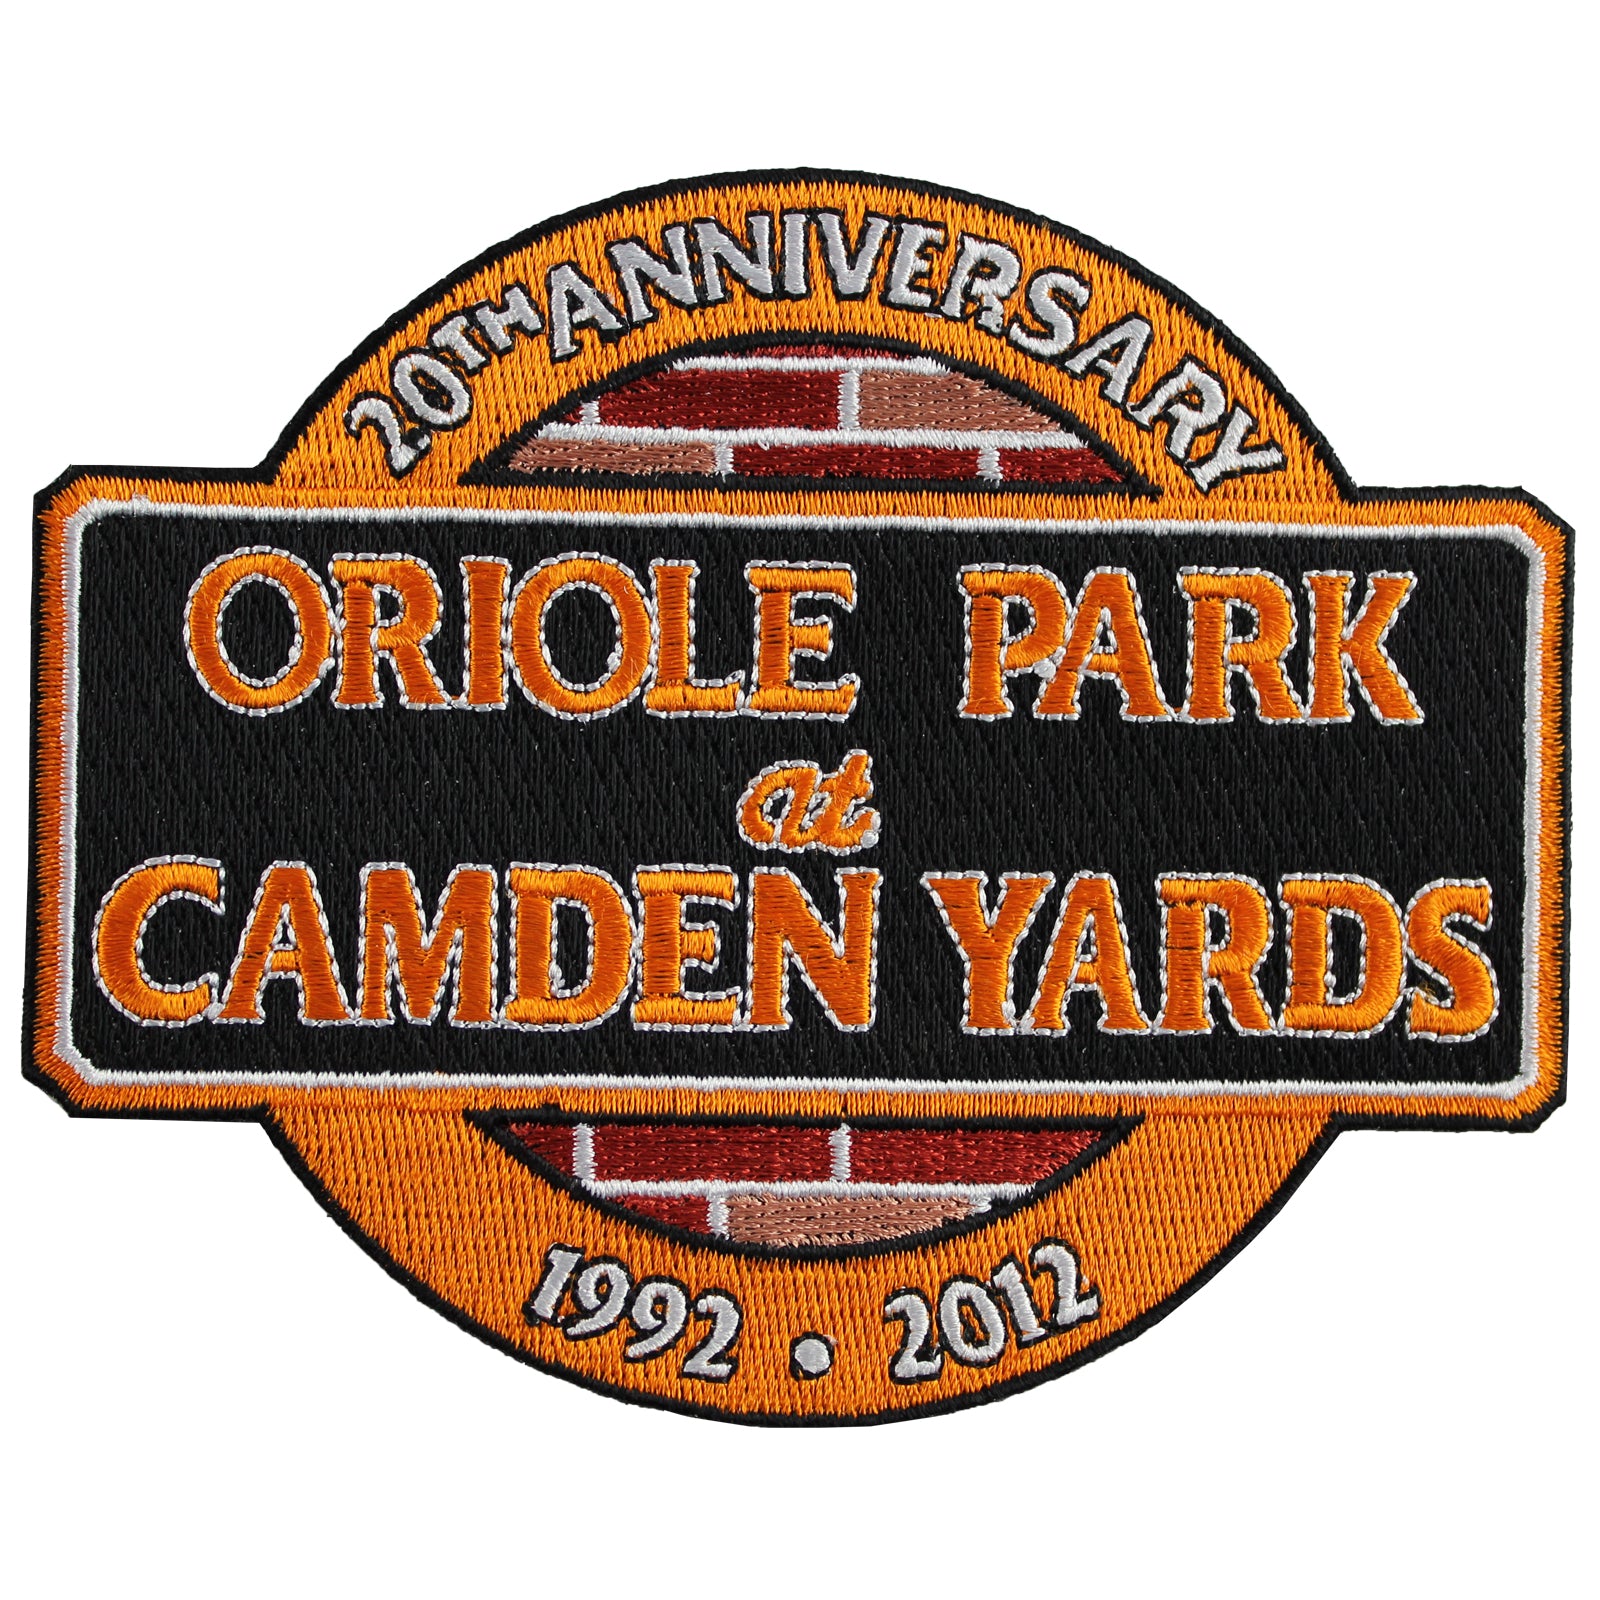 Baltimore Orioles Camden Yards 20th Anniversary Collectible Patch, 4.75 x 4